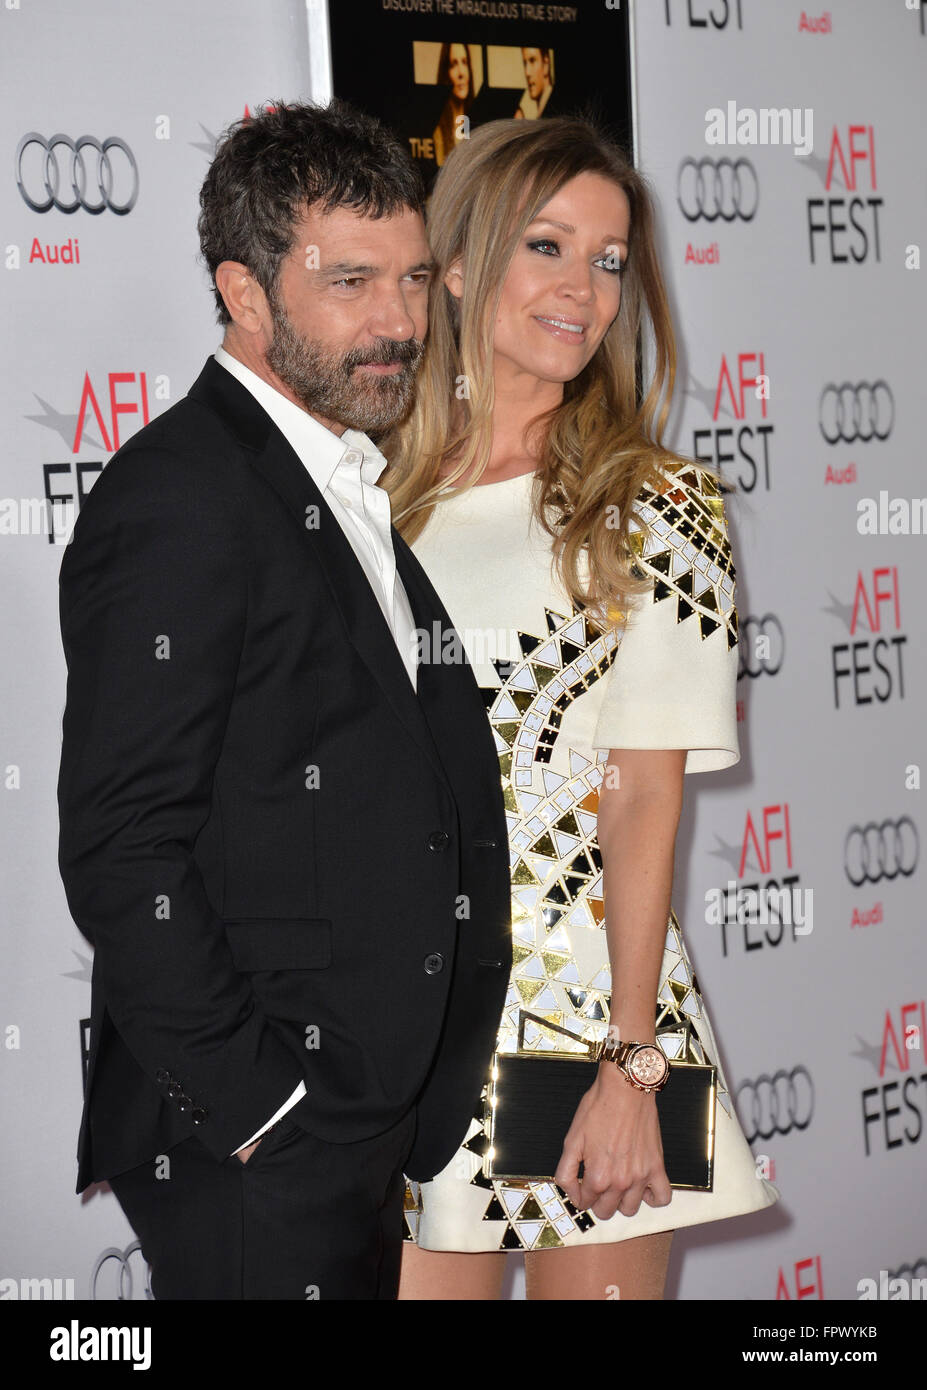 LOS ANGELES, CA - NOVEMBER 9, 2015: Actor Antonio Banderas & girlfriend Nicole Kimpel at the premiere of his movie 'The 33', part of the AFI FEST 2015, at the TCL Chinese Theatre, Hollywood. Stock Photo